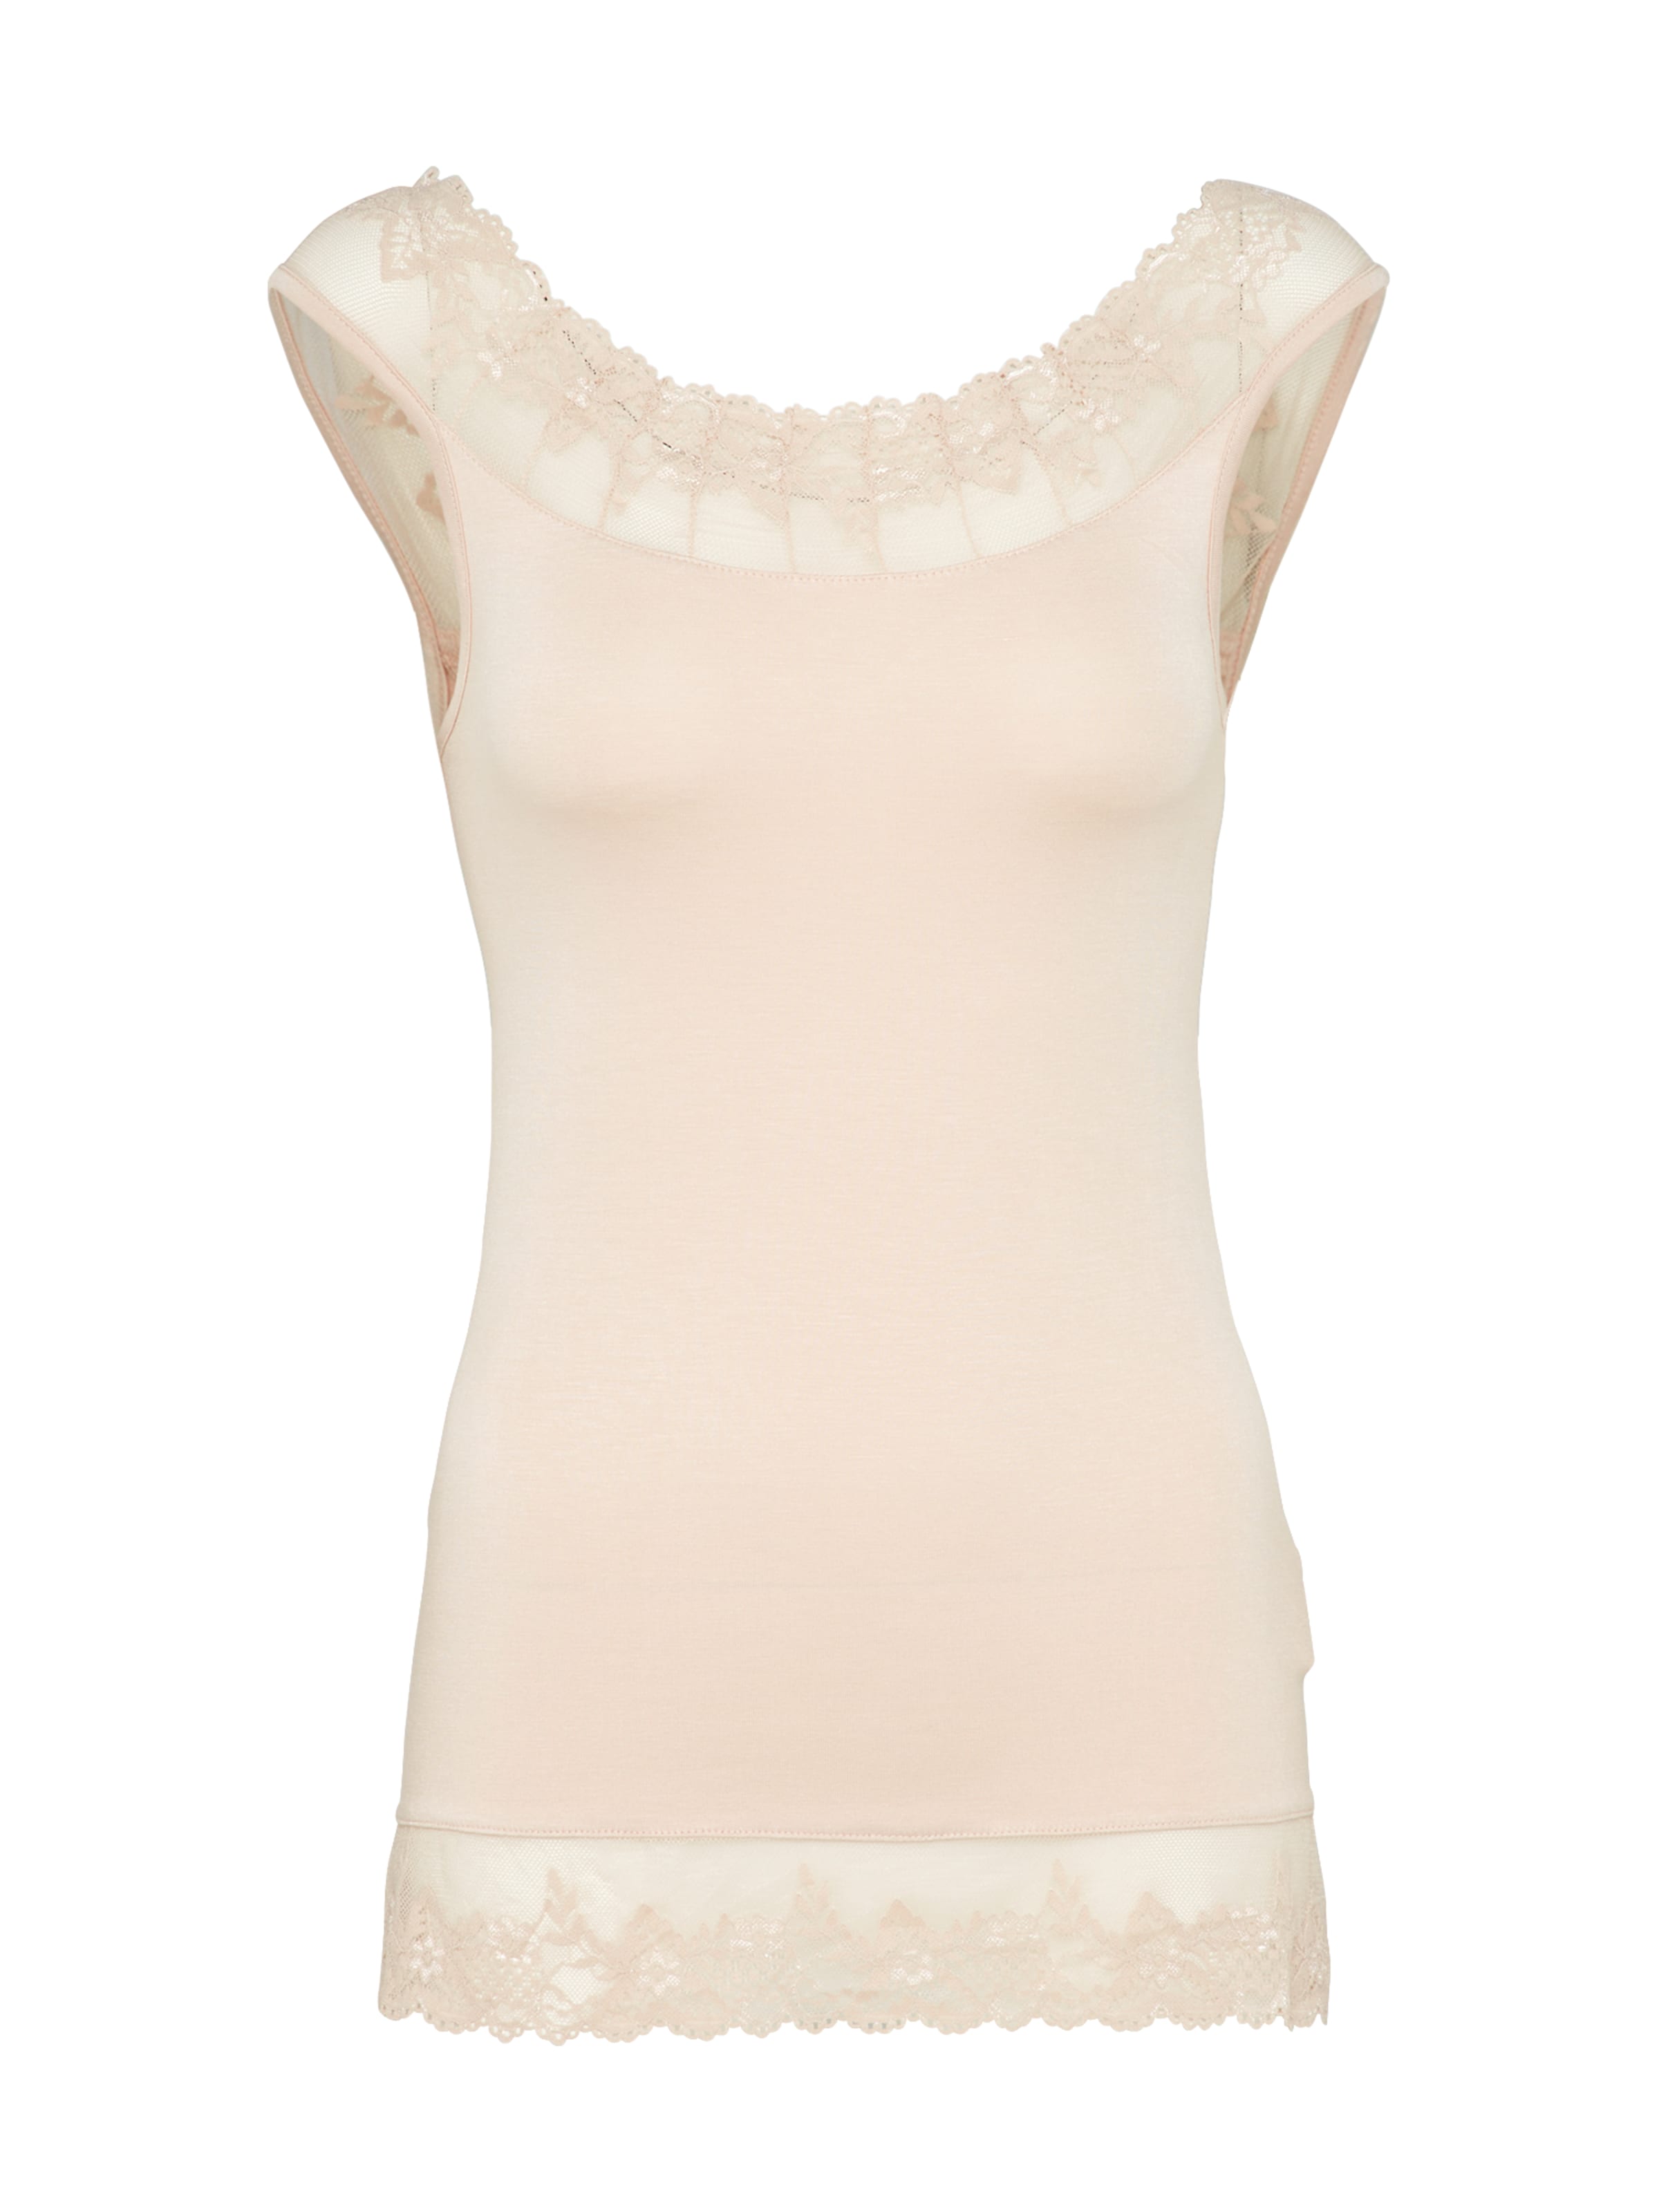 Frauen Shirts & Tops Cream Top 'Florence' in Puder - HL94000